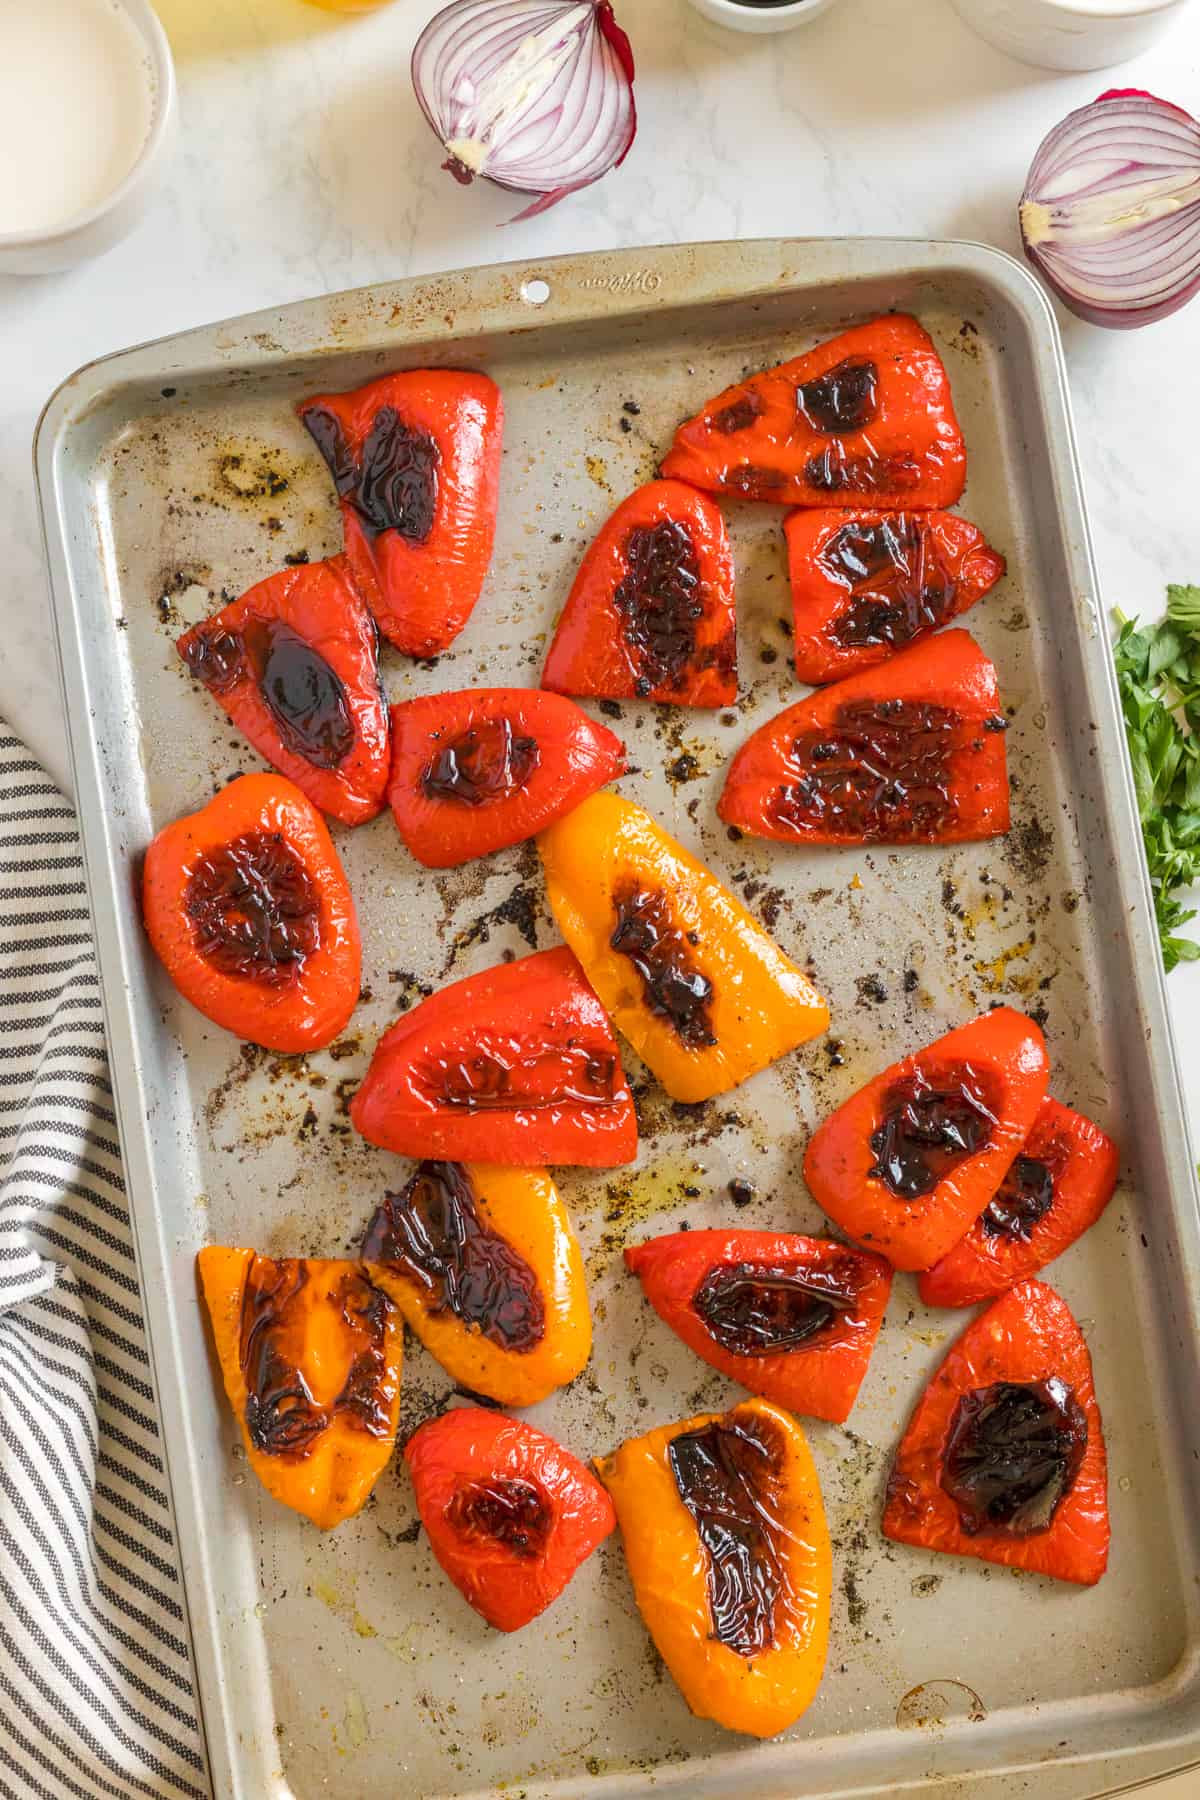 Bell peppers out of the oven, on a baking sheet.